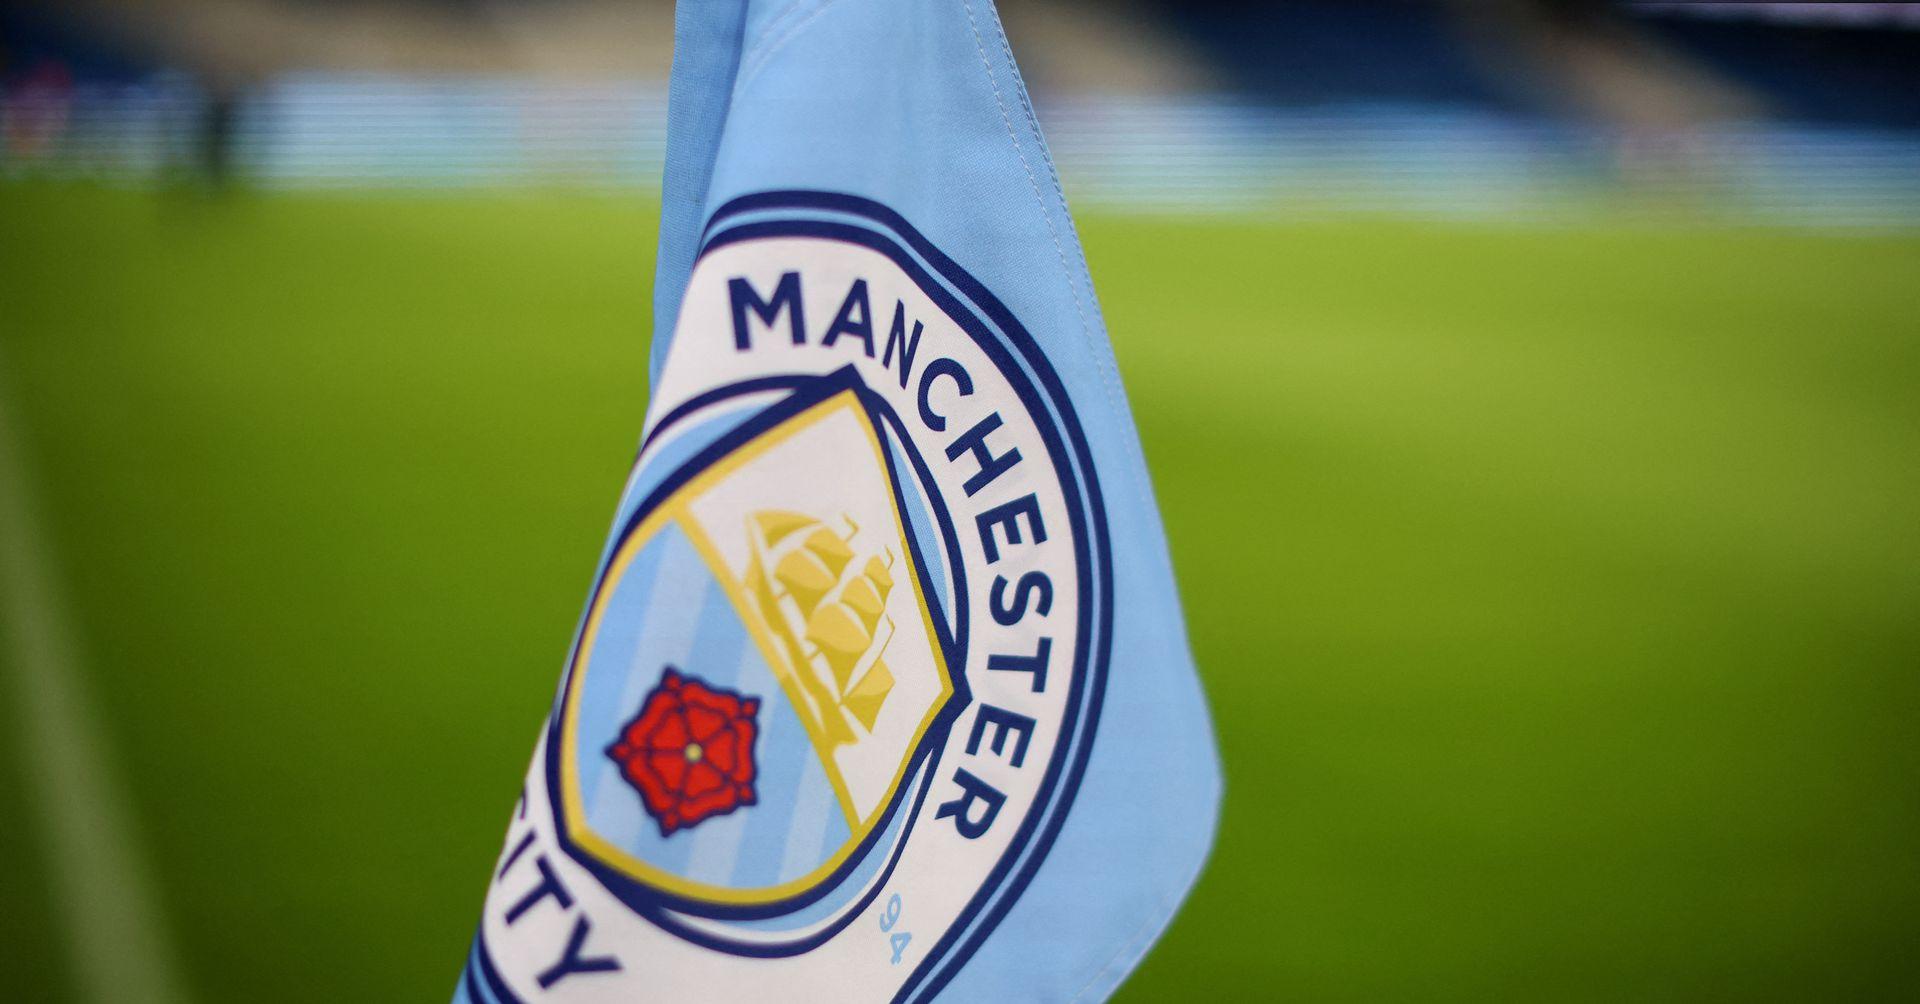 Man City face Southampton Man United host Charlton in League Cup